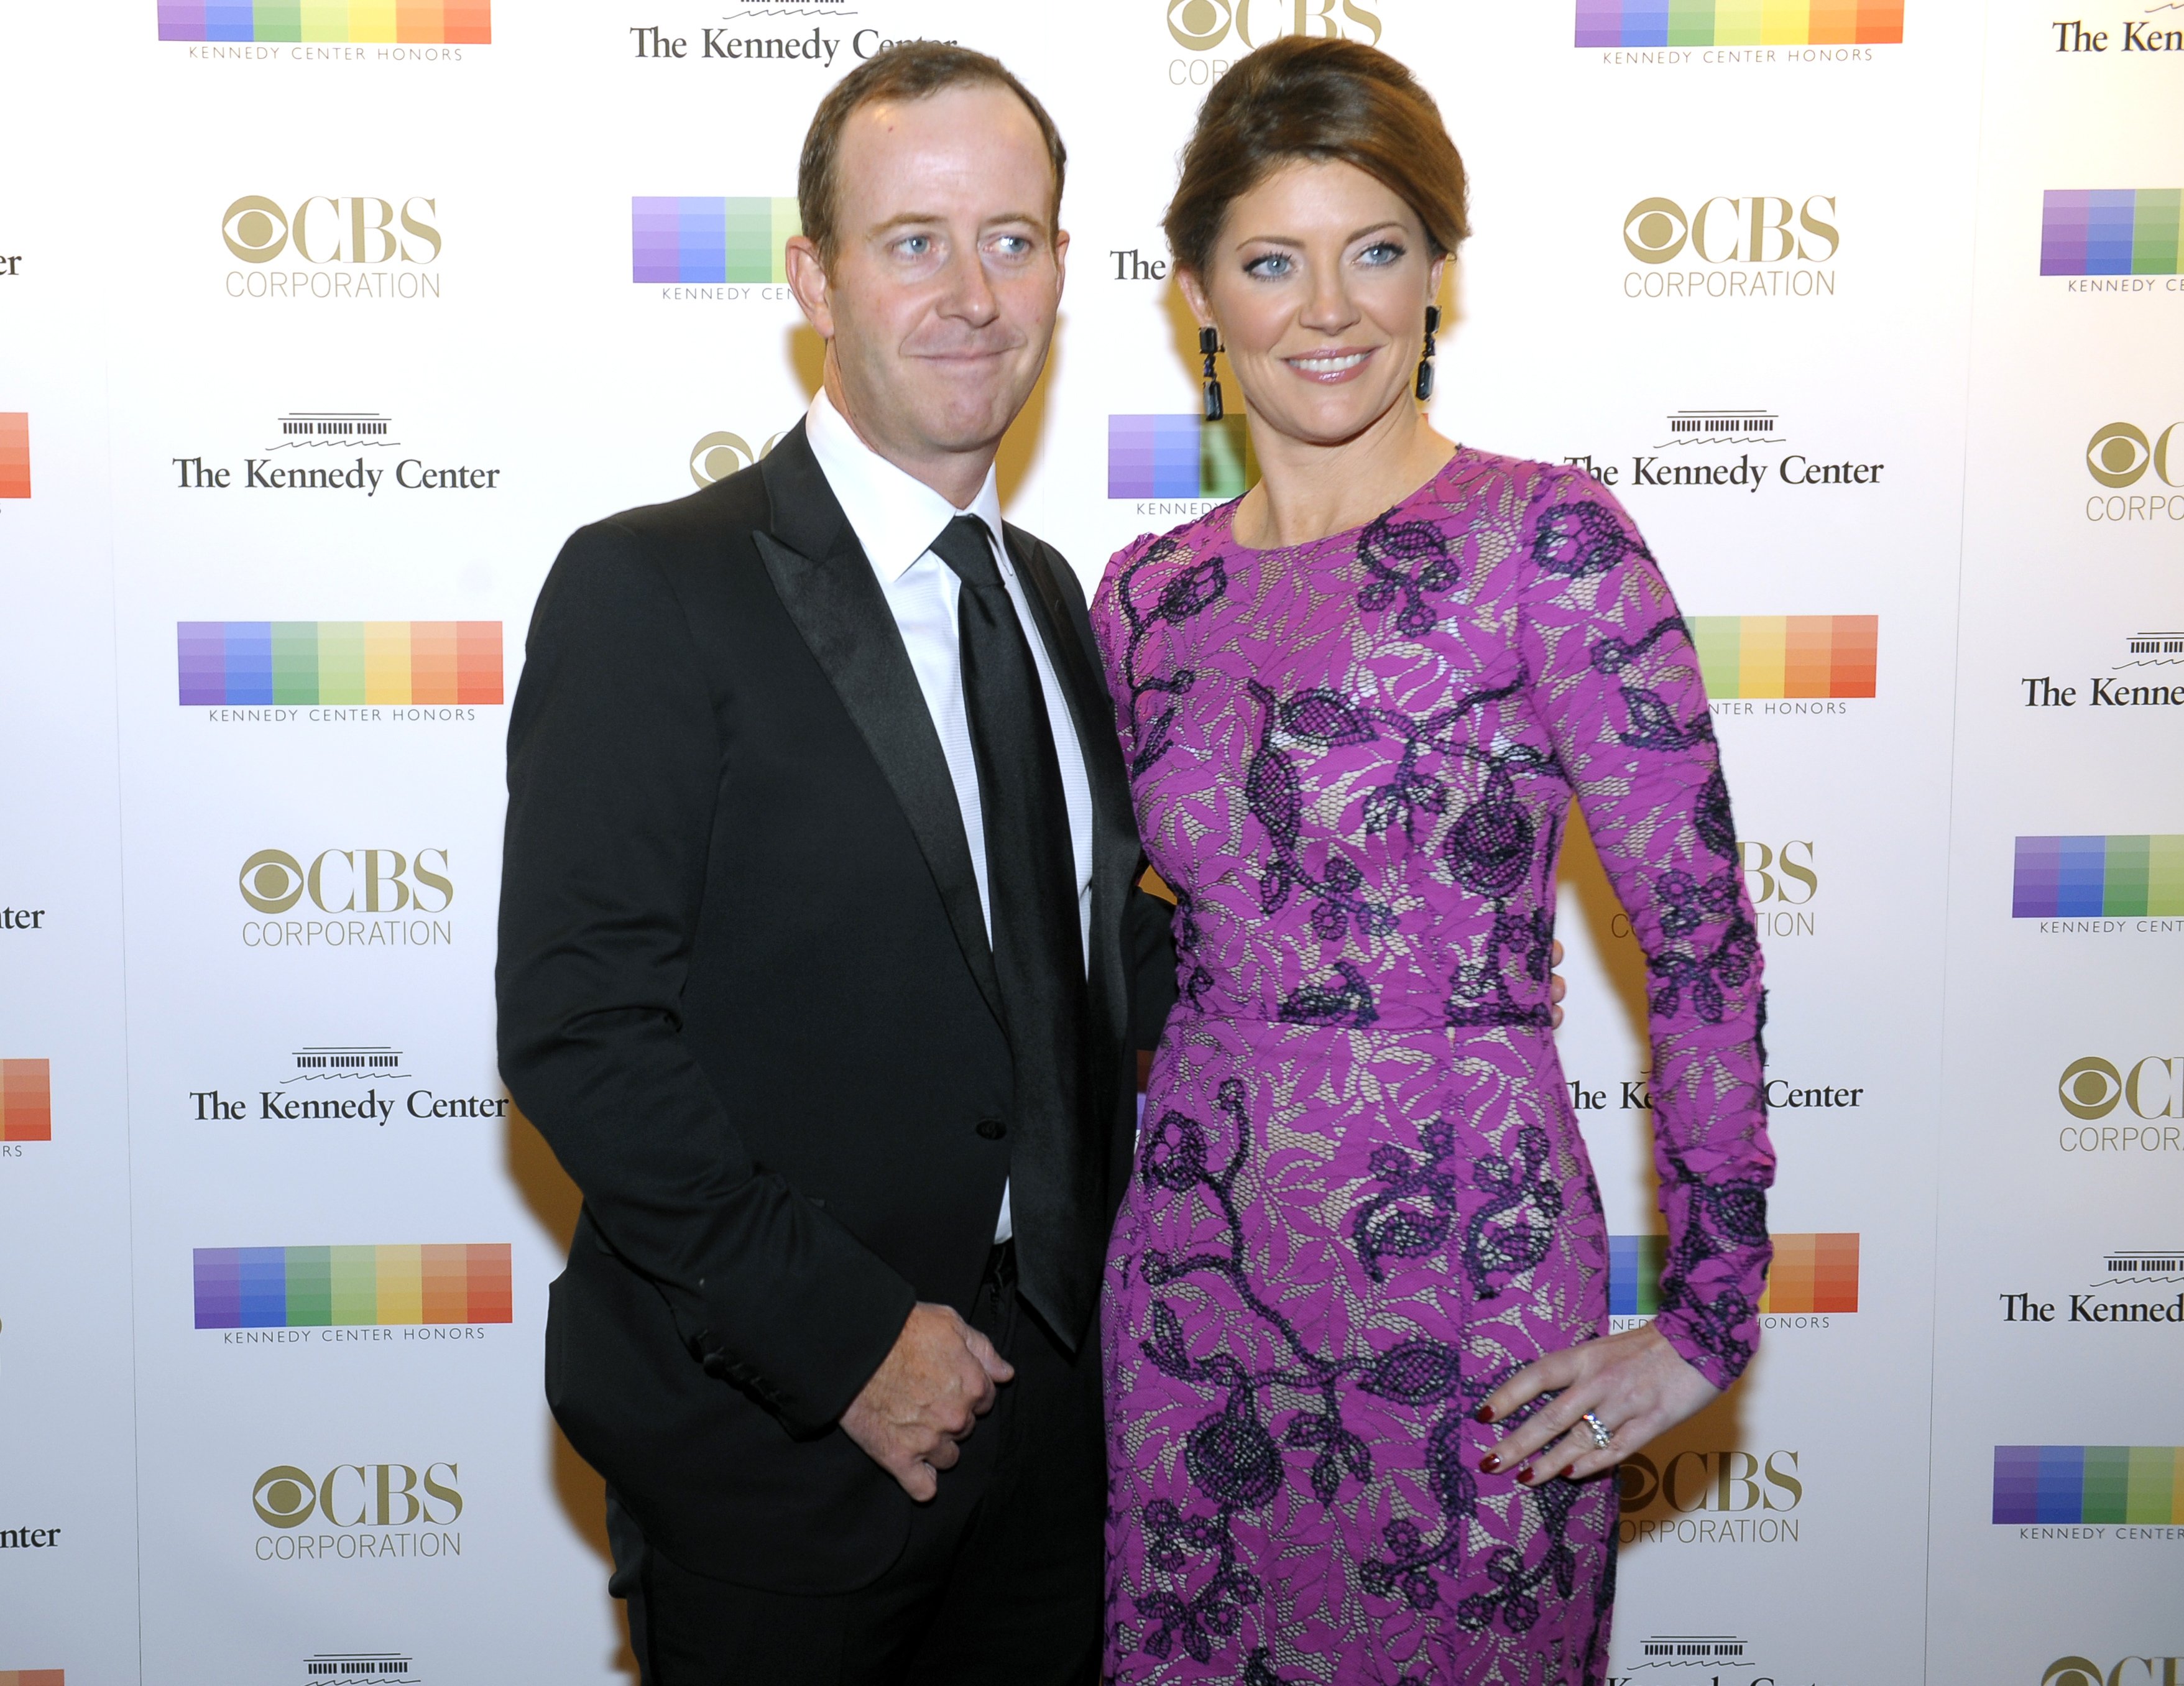 CBS's Norah O’Donnell & Her Spouse Have Been Together for 30 Years